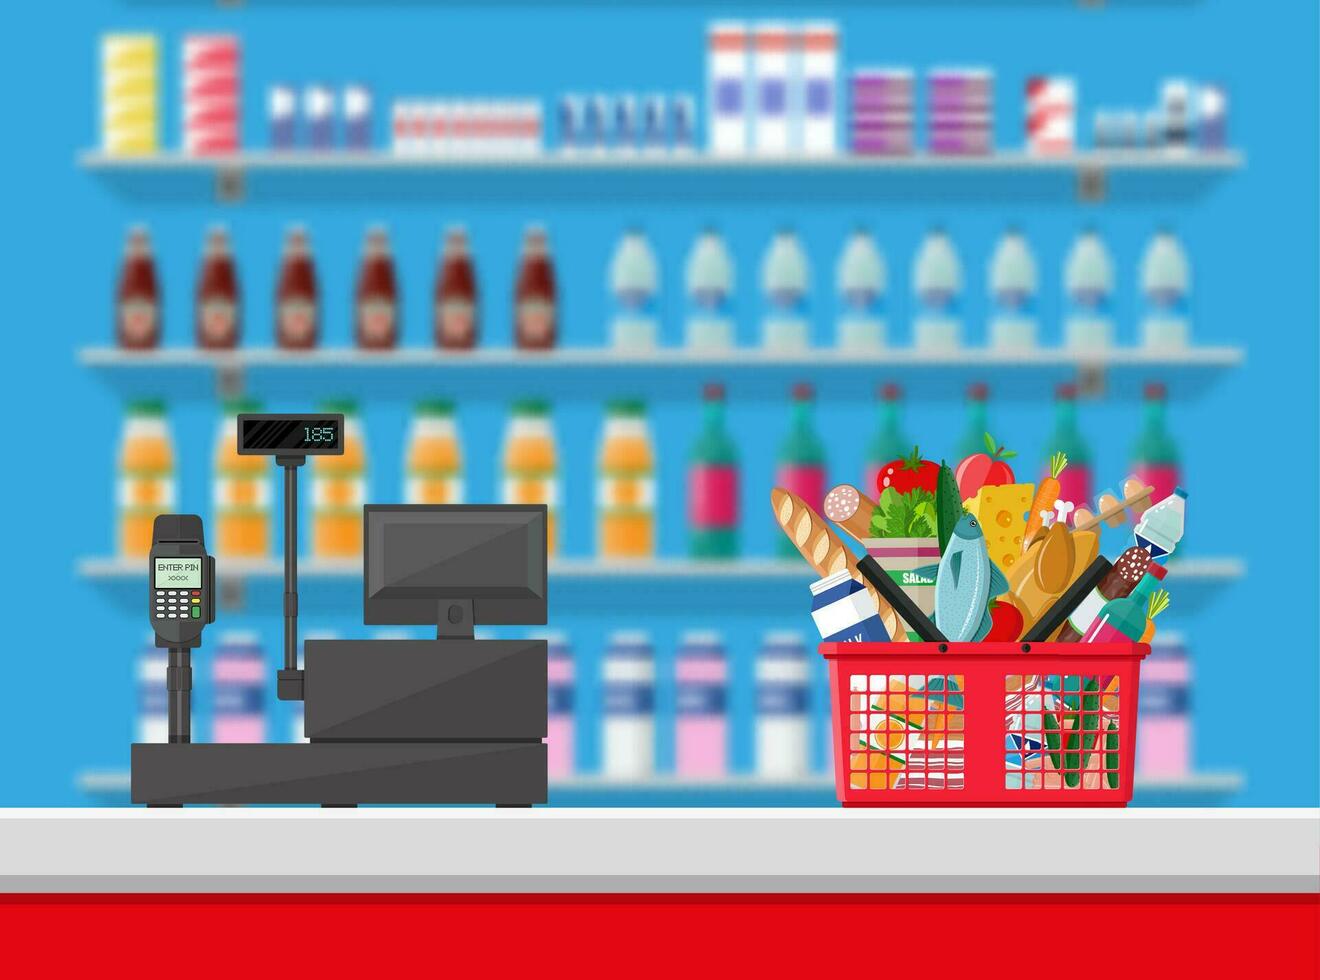 Supermarket interior. Cashier counter workplace. Shopping basket with food and drinks. Shelves with products. Cash register, pos terminal and keypad. Vector illustration in flat style